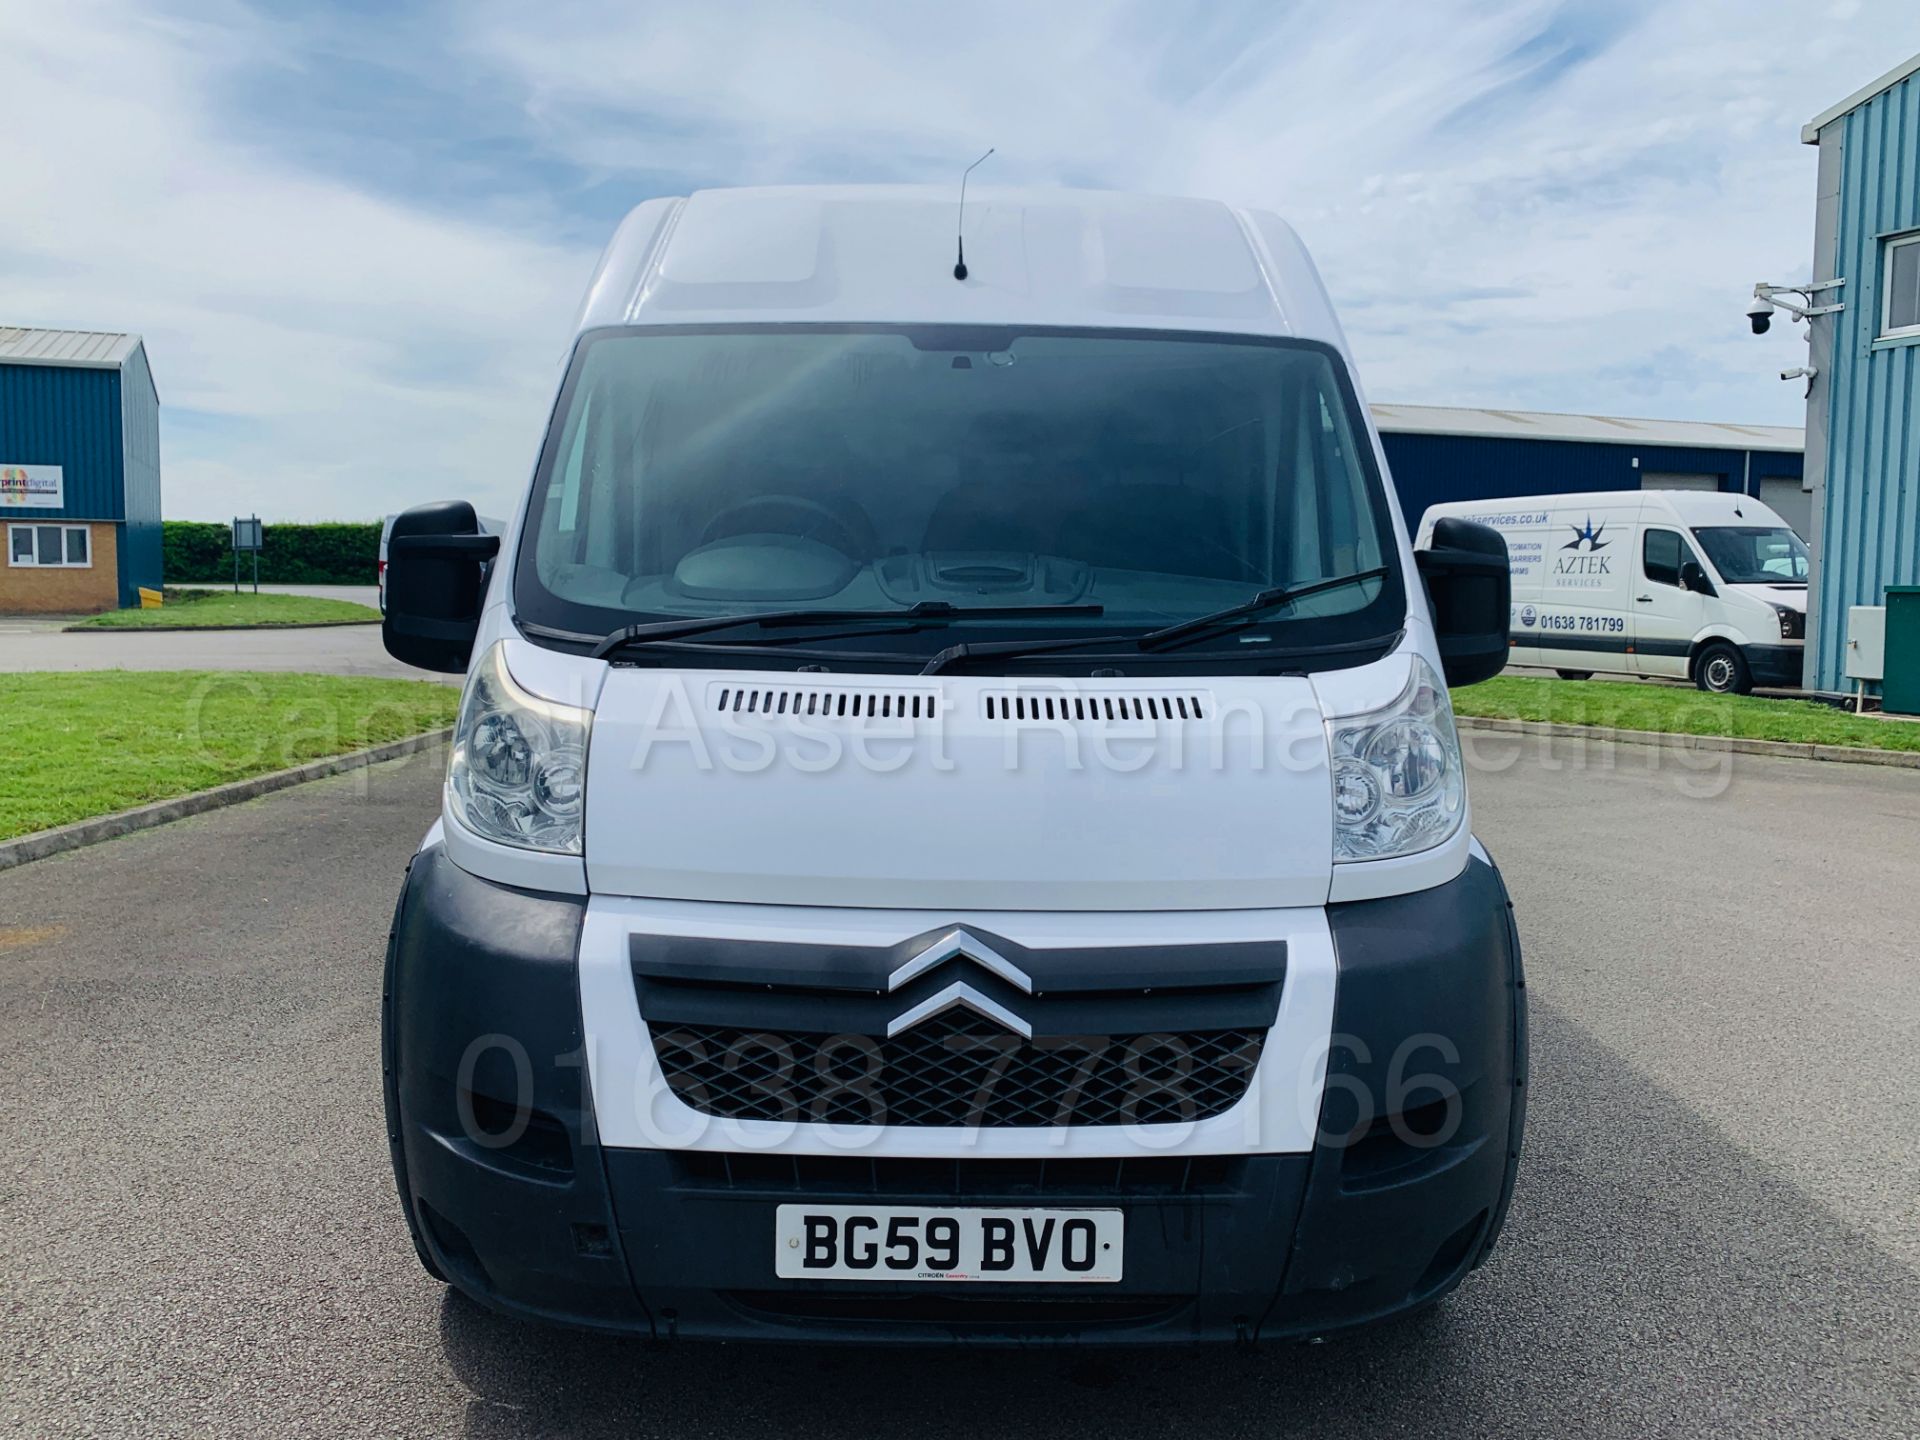 CITROEN RELAY 'L4 EXTRA LWB HI-ROOF' (2010 MODEL) '2.2 HDI - 120 BHP - 6 SPEED' (3500 KG) *AIR CON* - Image 12 of 34